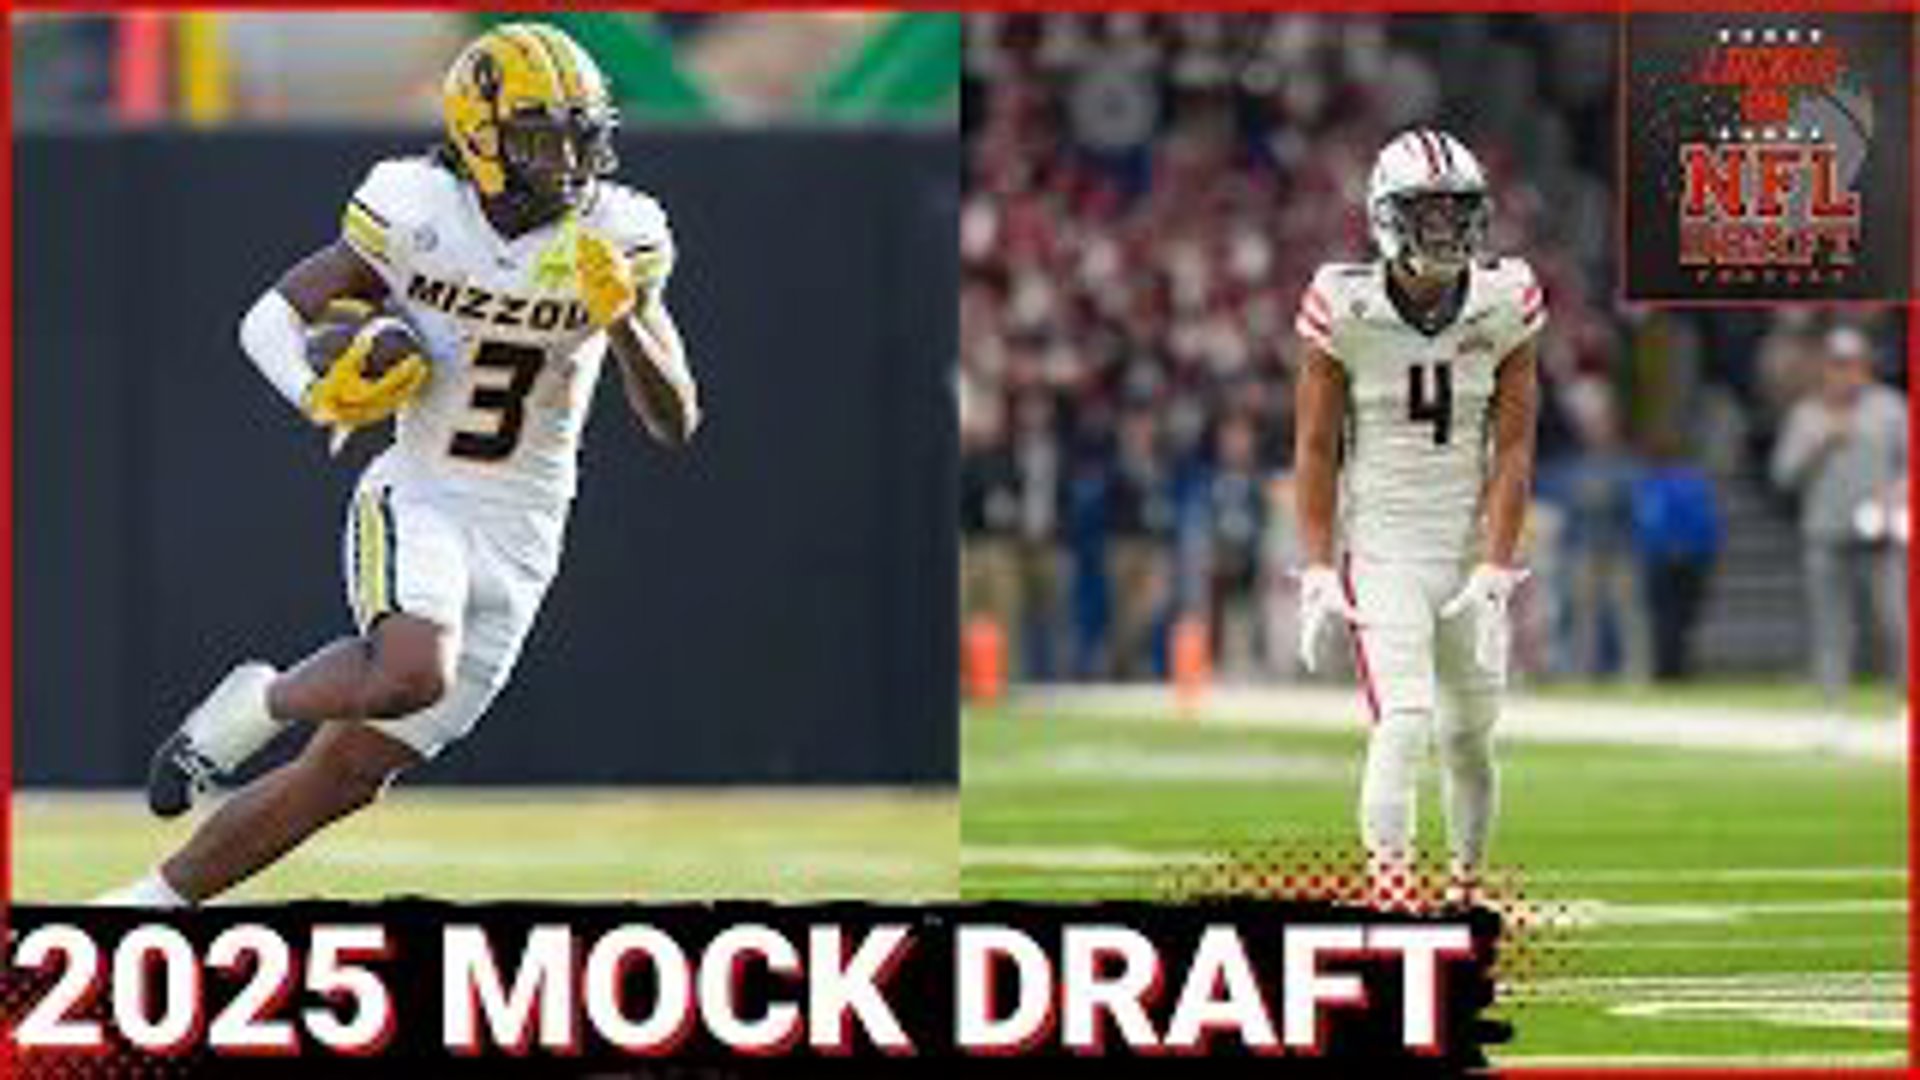 Luther Burden III and Tetairoa McMillan are the first 2 picks in Pro Football Network's latest 2025 NFL Mock Draft.